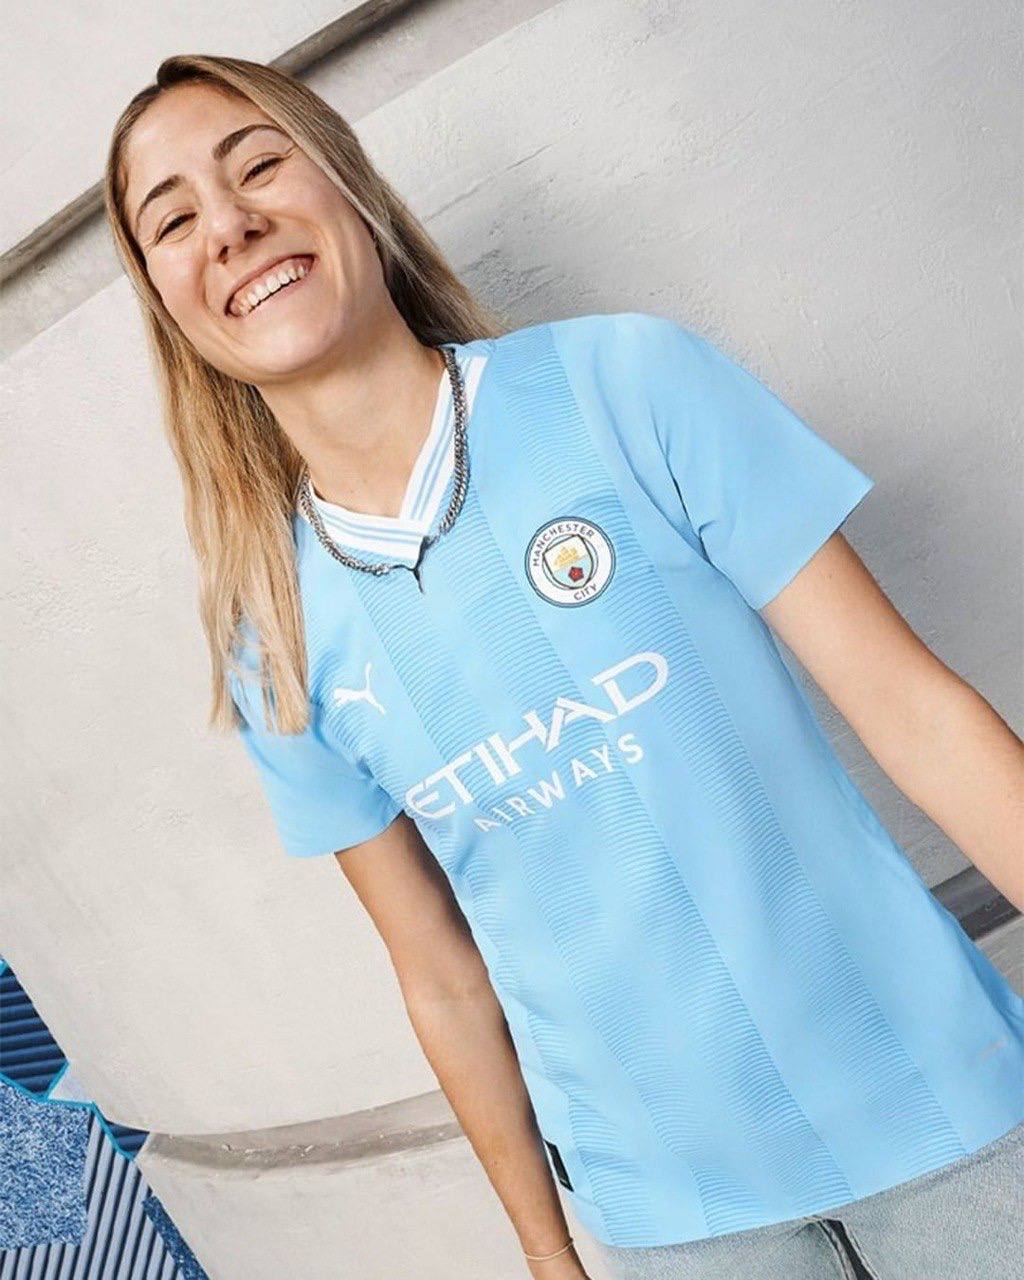 Manchester City Home 23/24 (Women's Size)